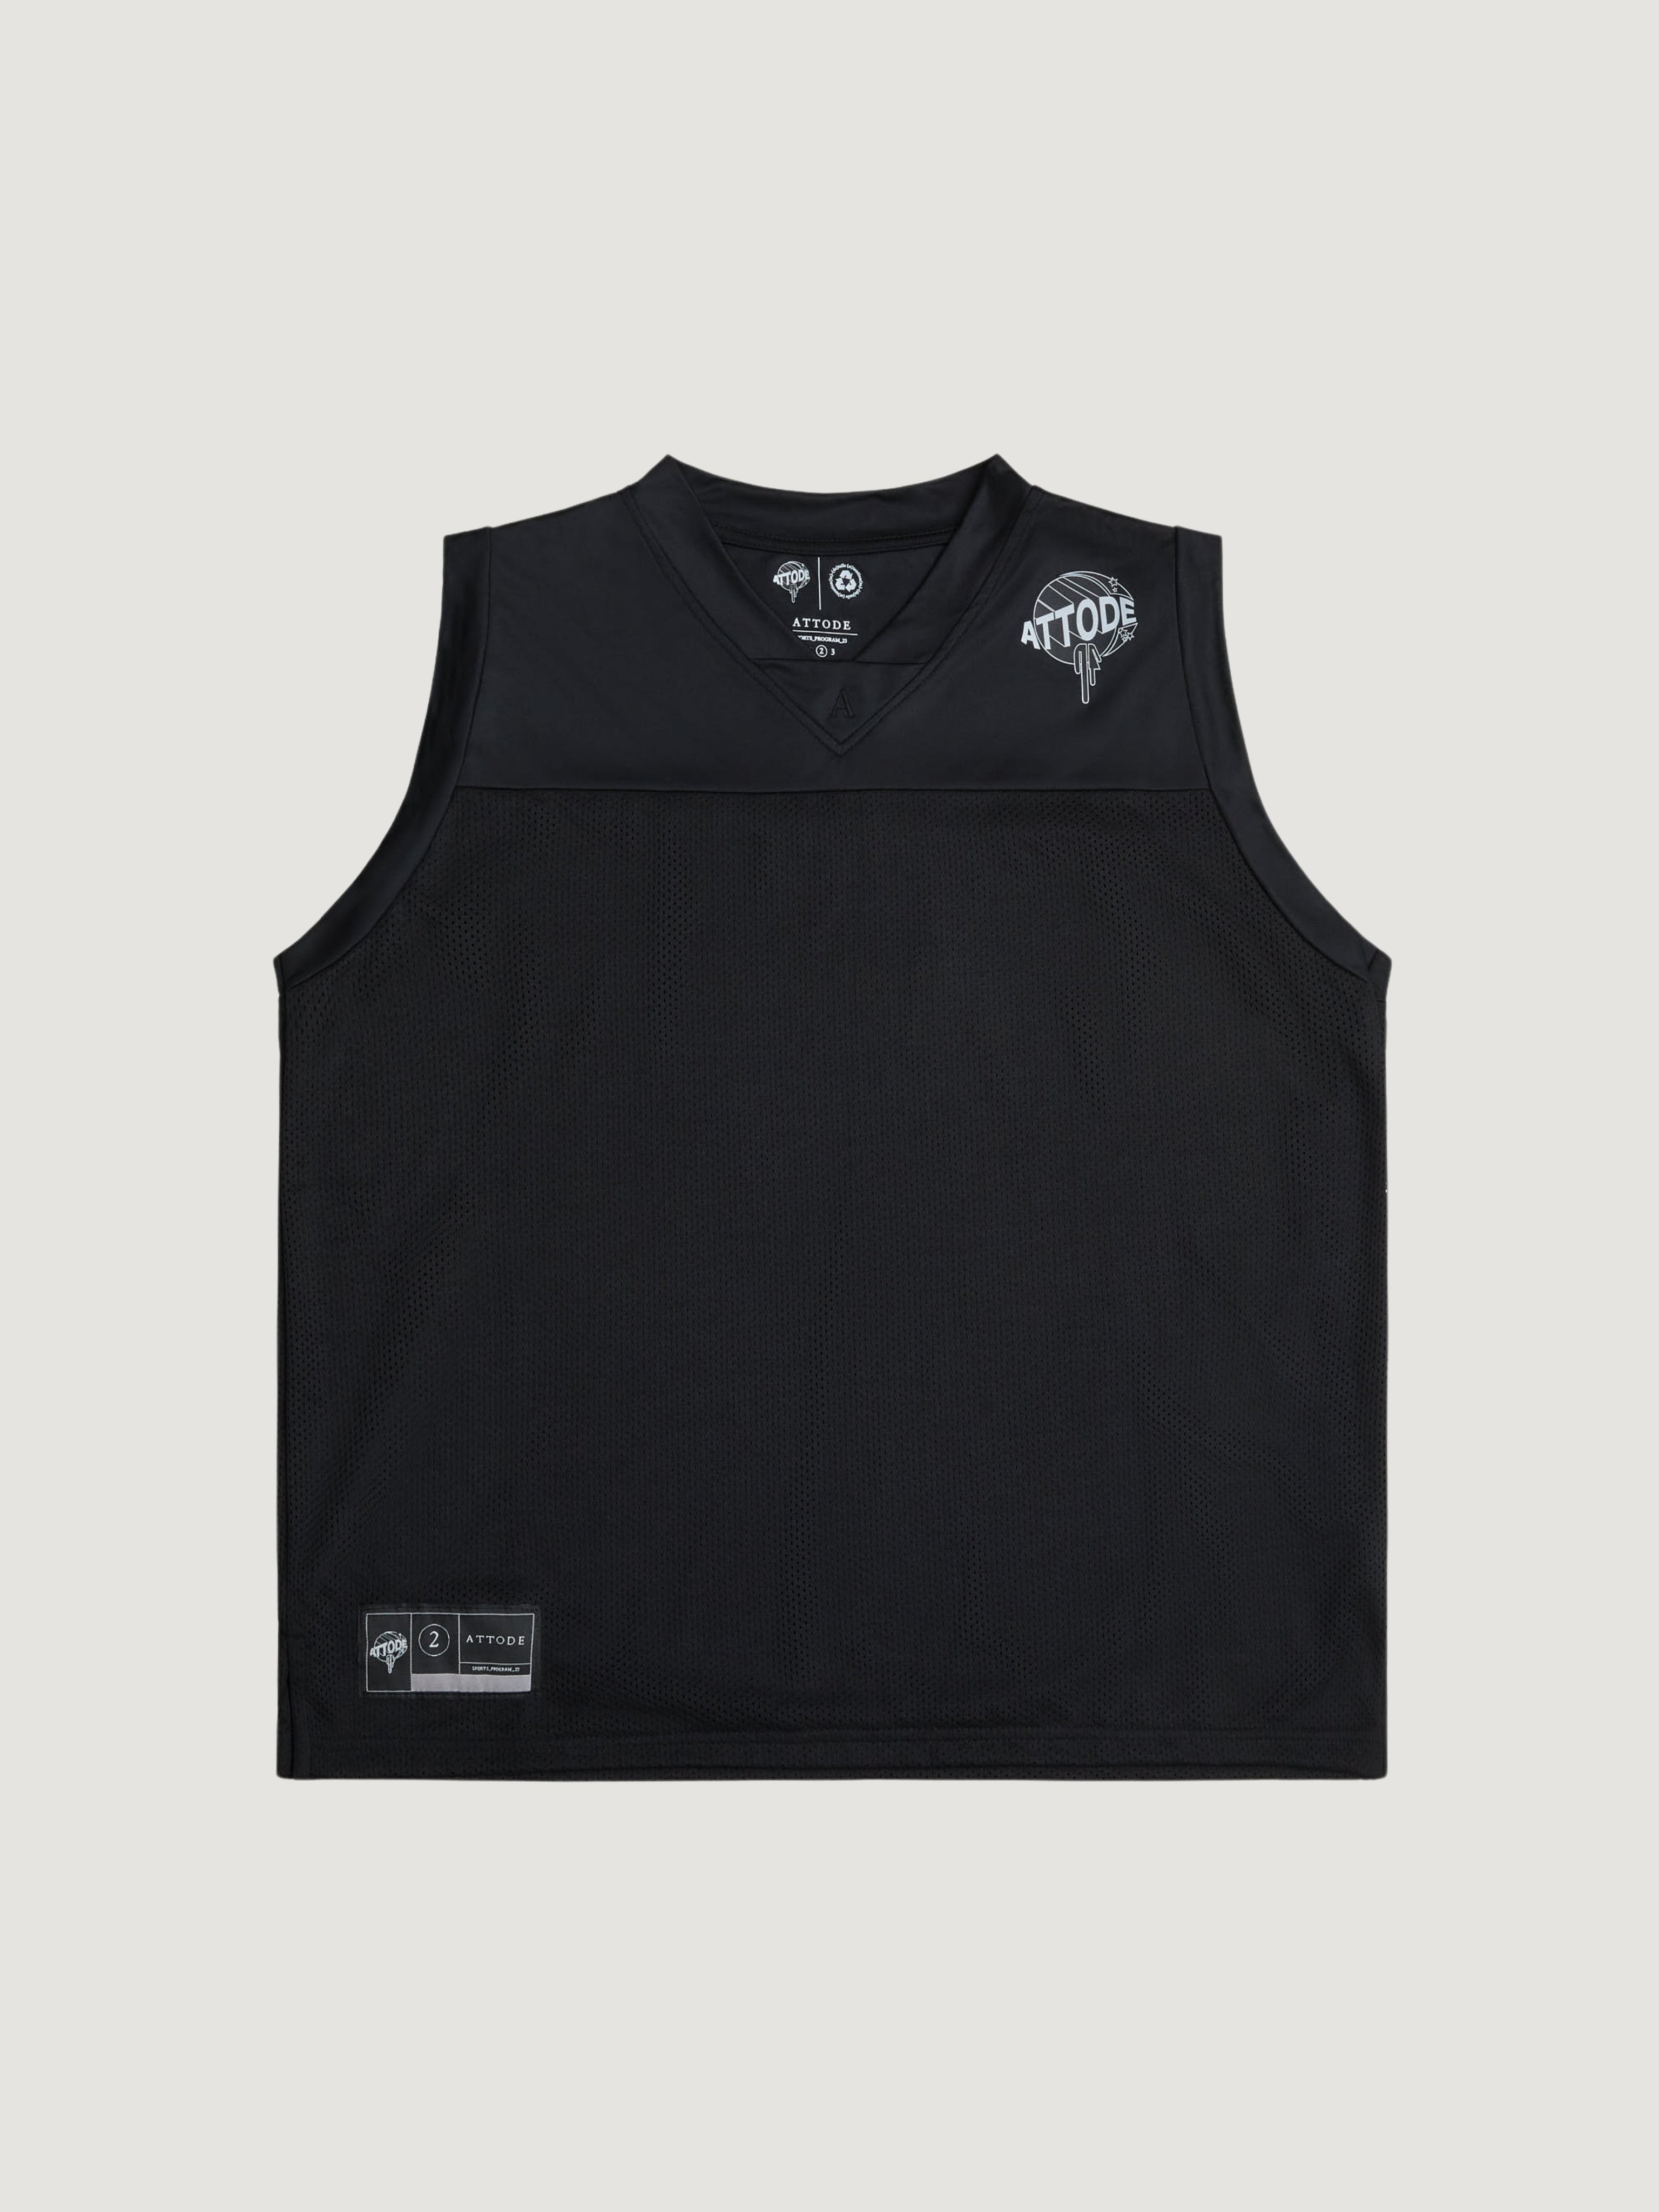 CASUAL SPORTS TANK TOP BLACK - ATTODE